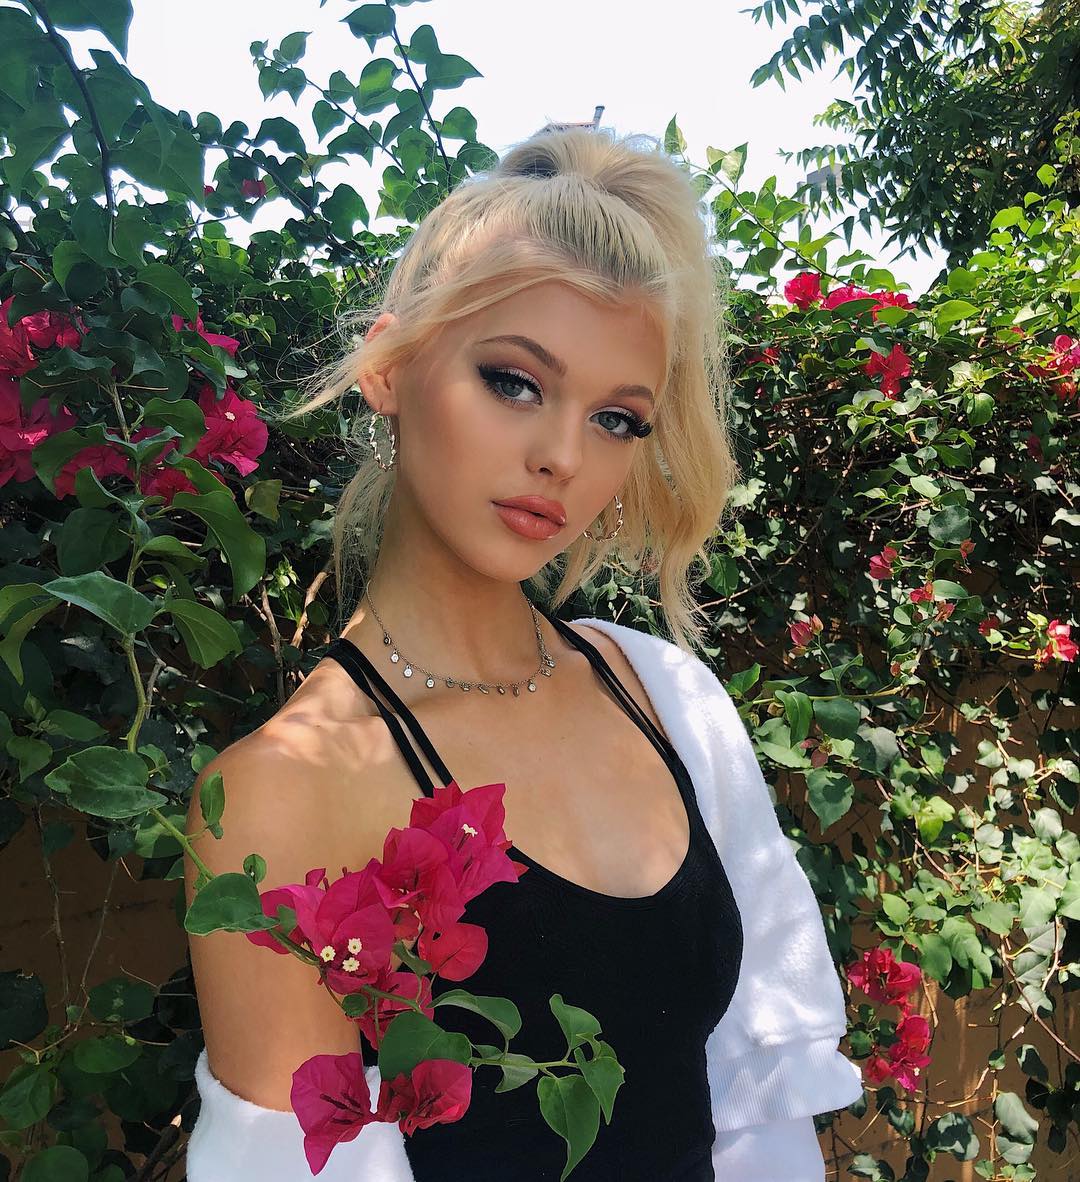 61 Sexy Loren Gray Boobs Pictures Are A Treat For Fans – The Viraler